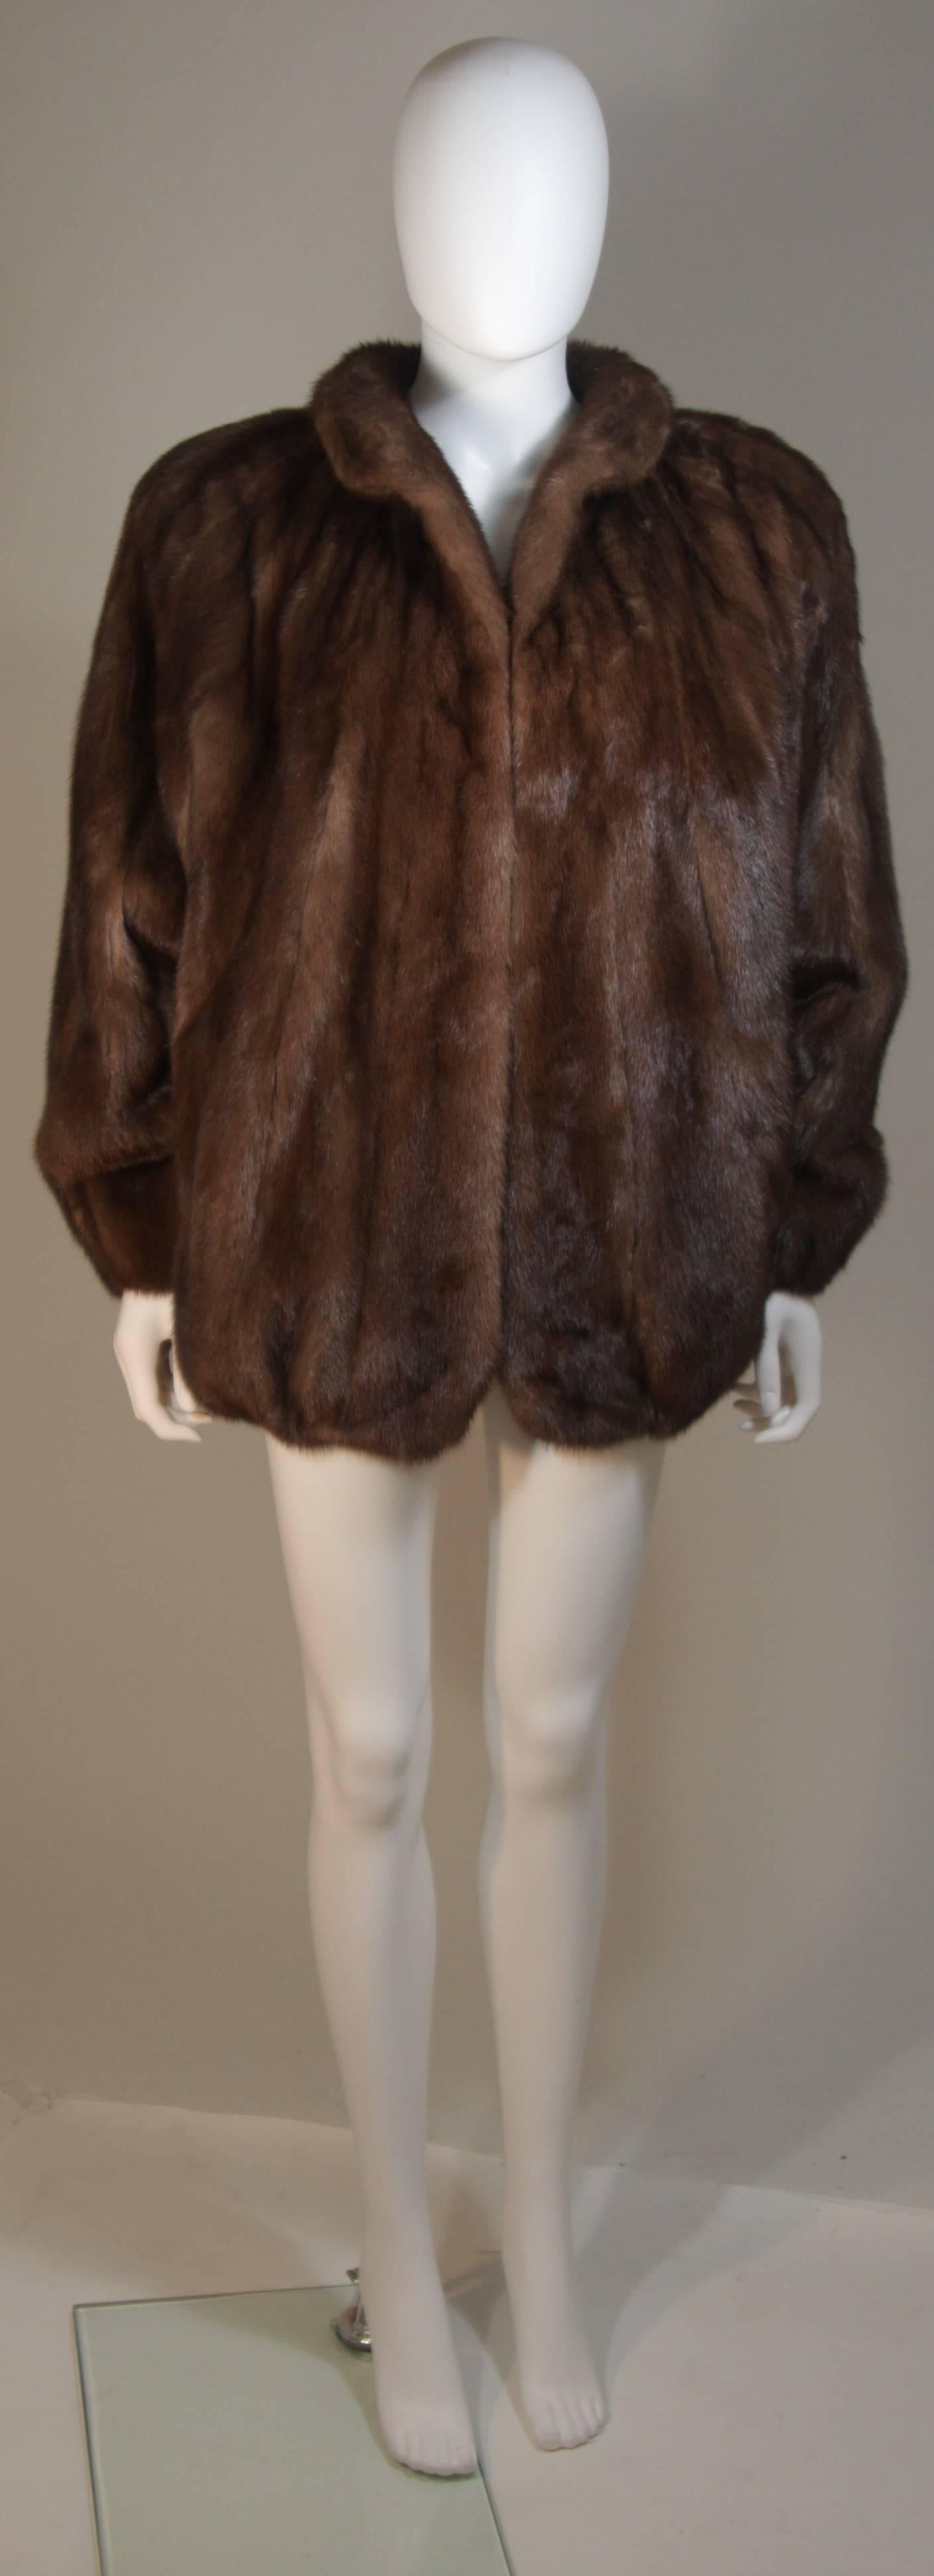 This Wachtenheim Furs  jacket is composed of a natural color mink. Features Dolman style sleeves with a zipper front closure and velvet pockets. In excellent condition. 

  **Please cross-reference measurements for personal accuracy. Size in